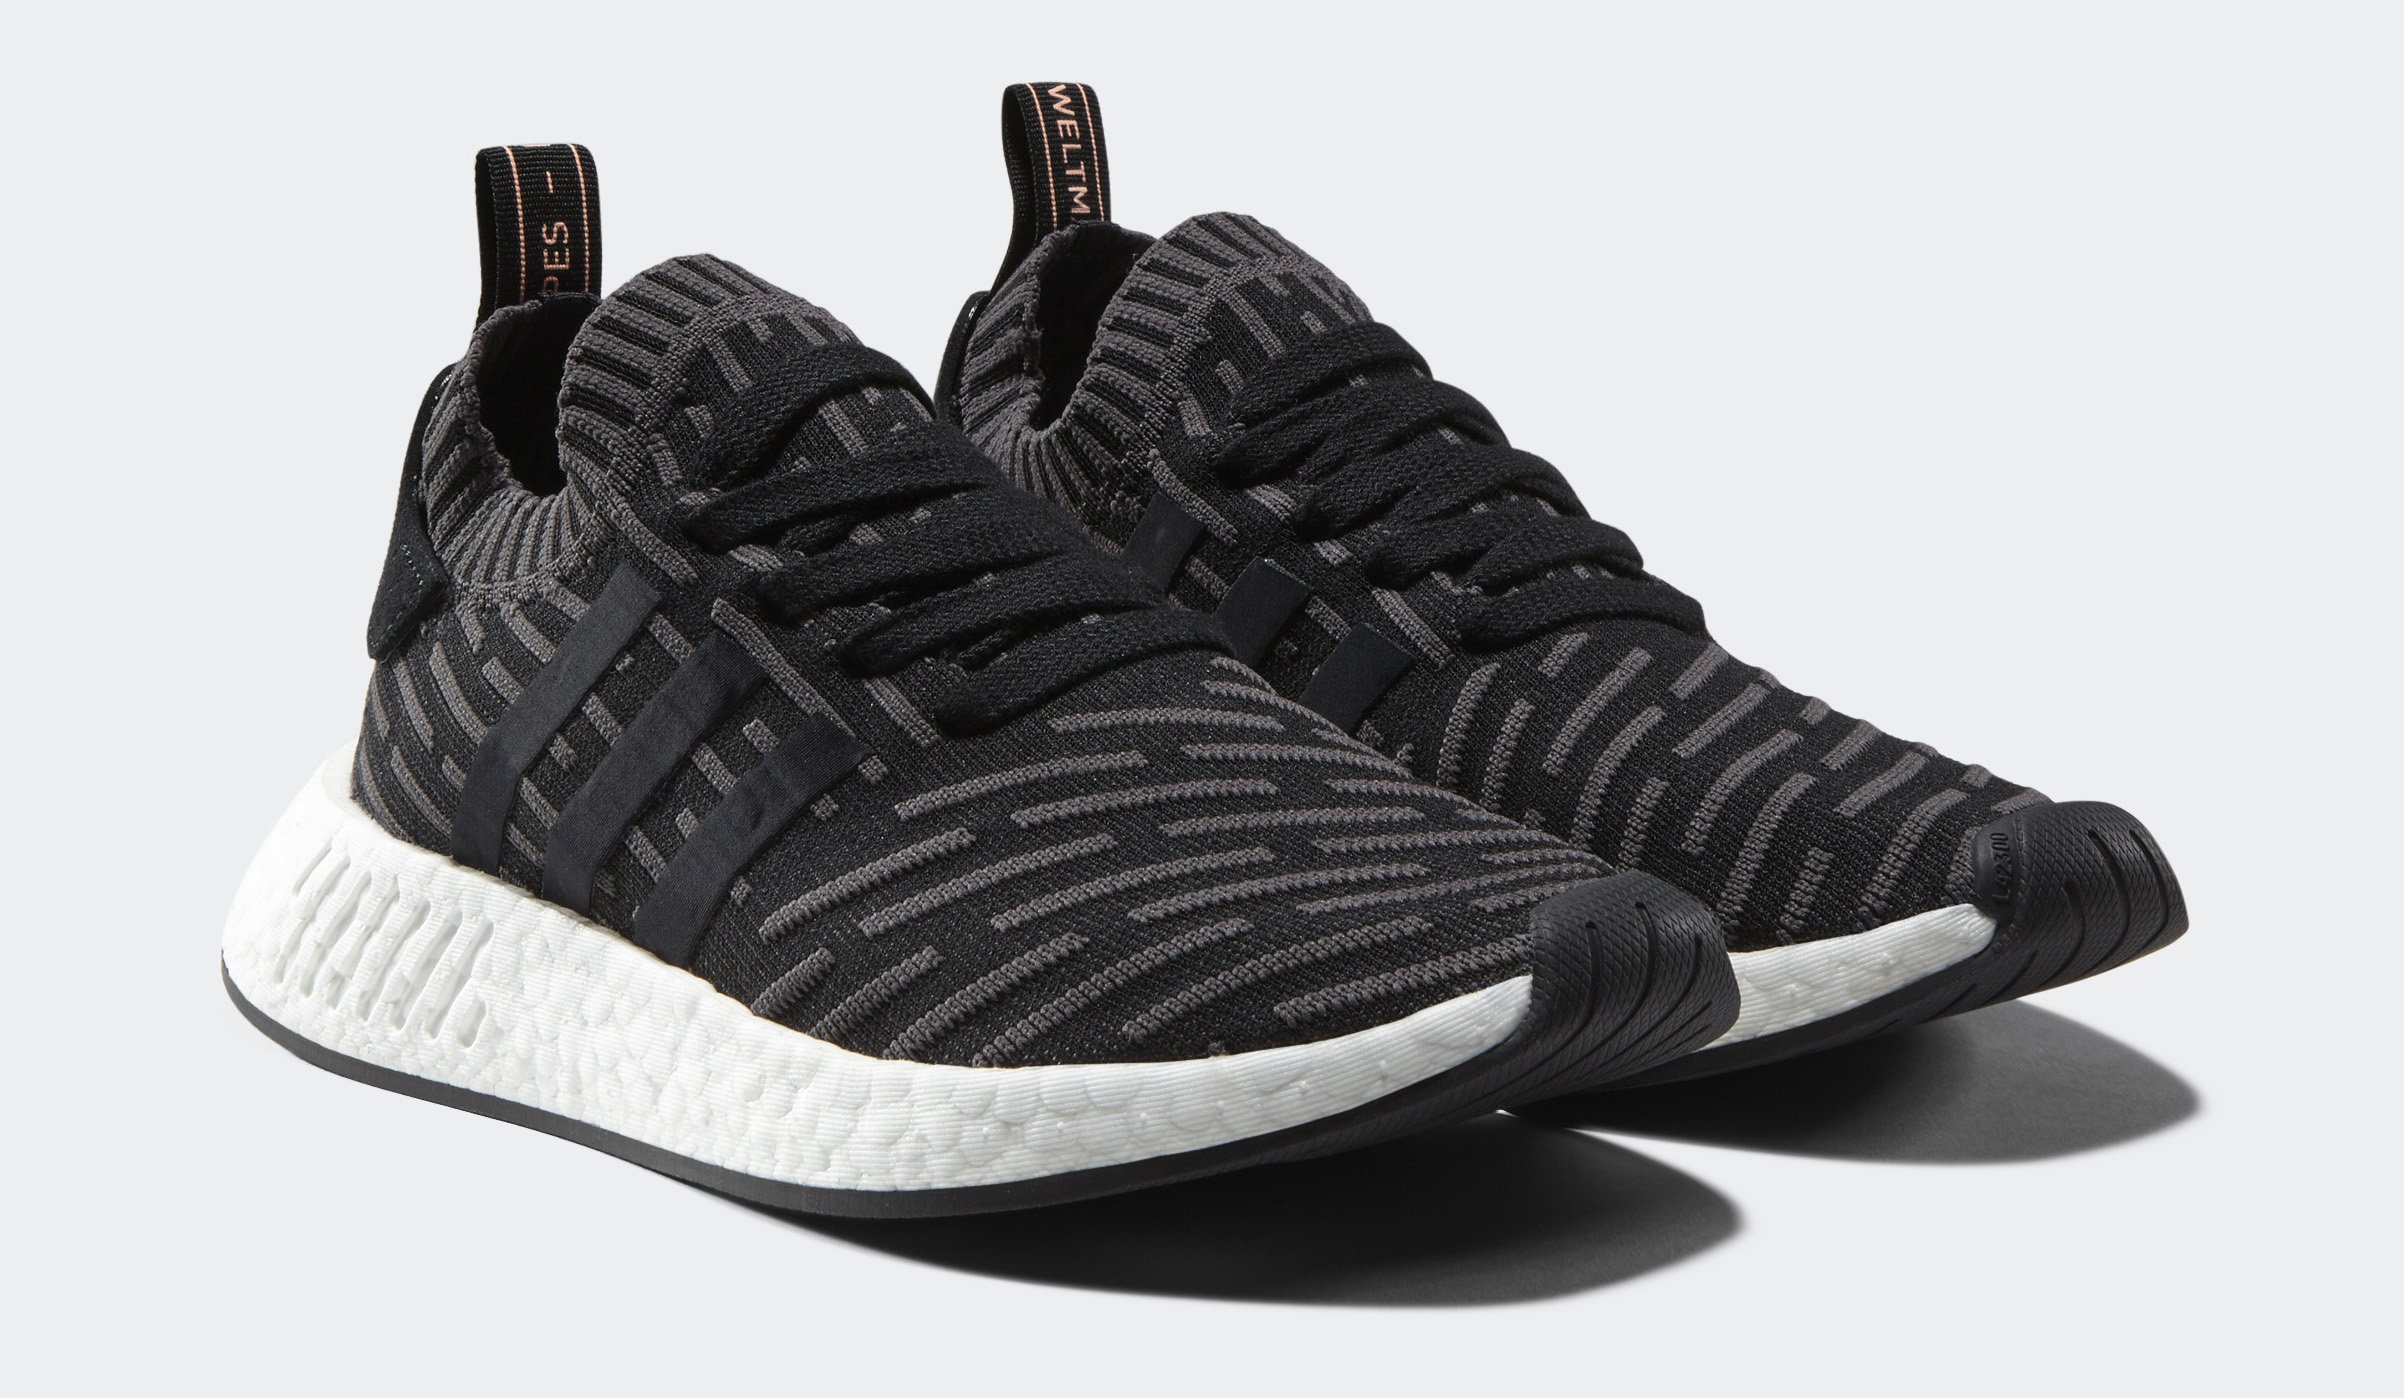 CREW on Twitter: "Adidas NMD R2 Primeknit W (BA7239) Black Pink Pre Order and on 1 Dec https://t.co/51rbJfVzDO https://t.co/eo59OQqS8O" / Twitter